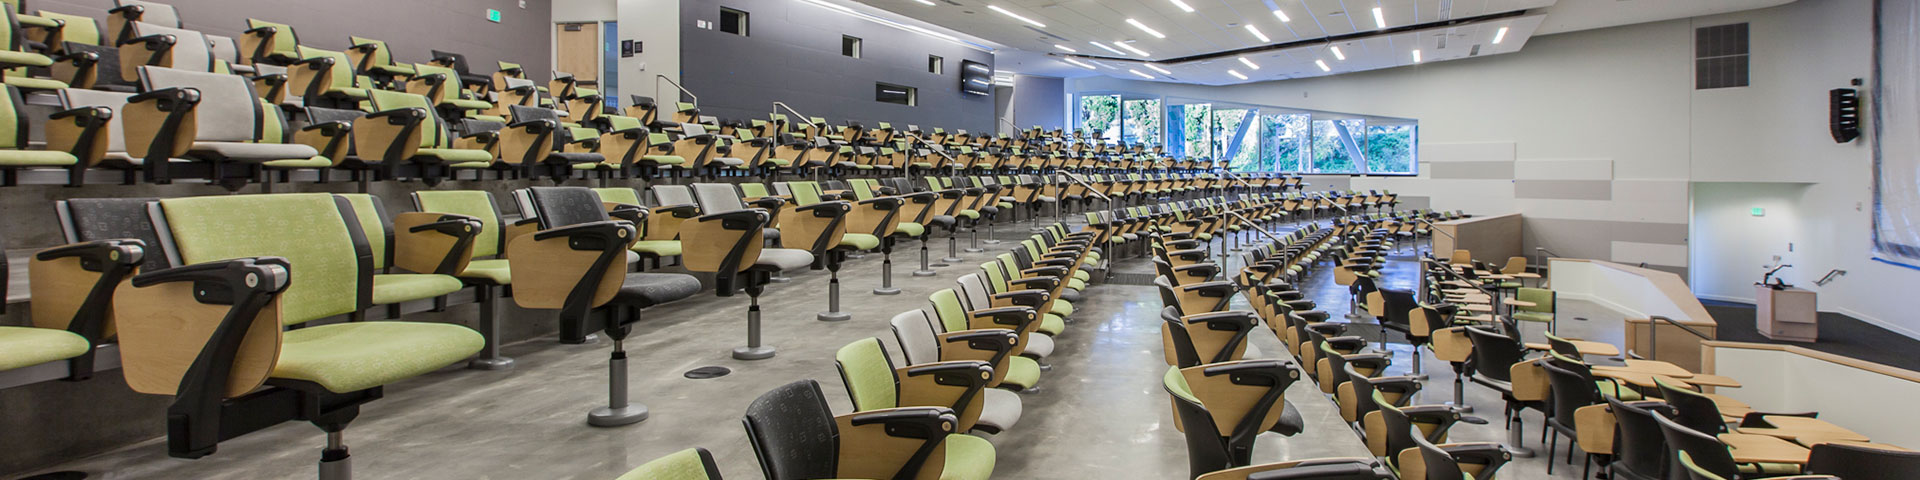 Image of a lecture hall. 